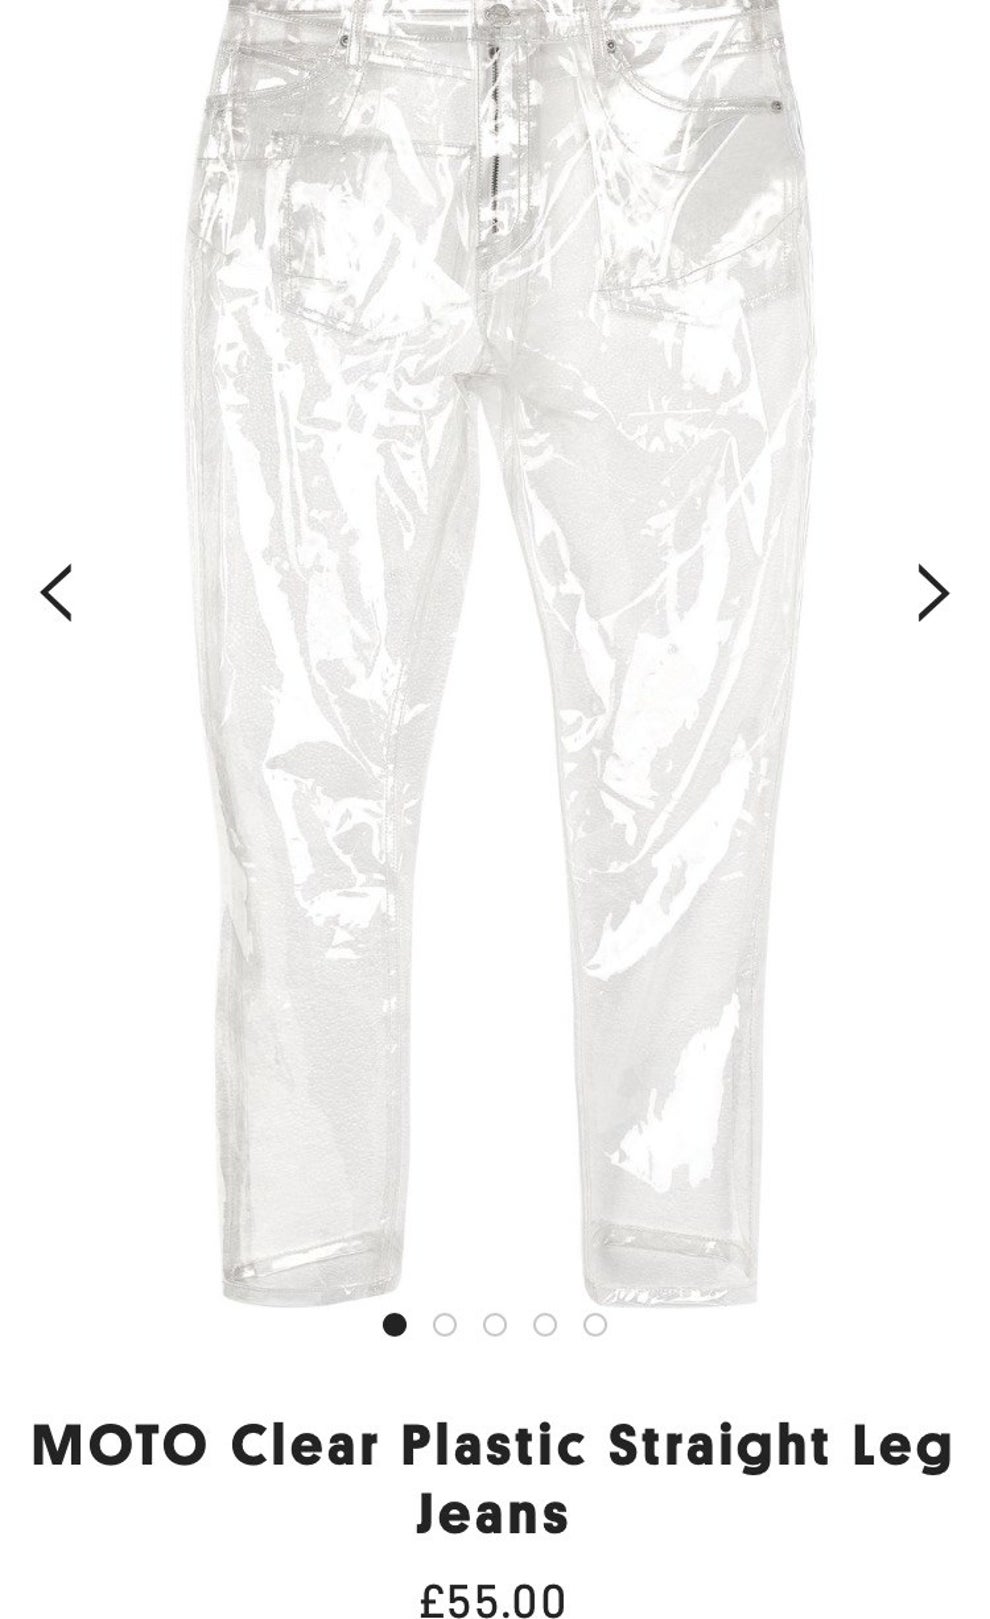 OK Topshop Has Officially Fuckin' These Plastic Jeans